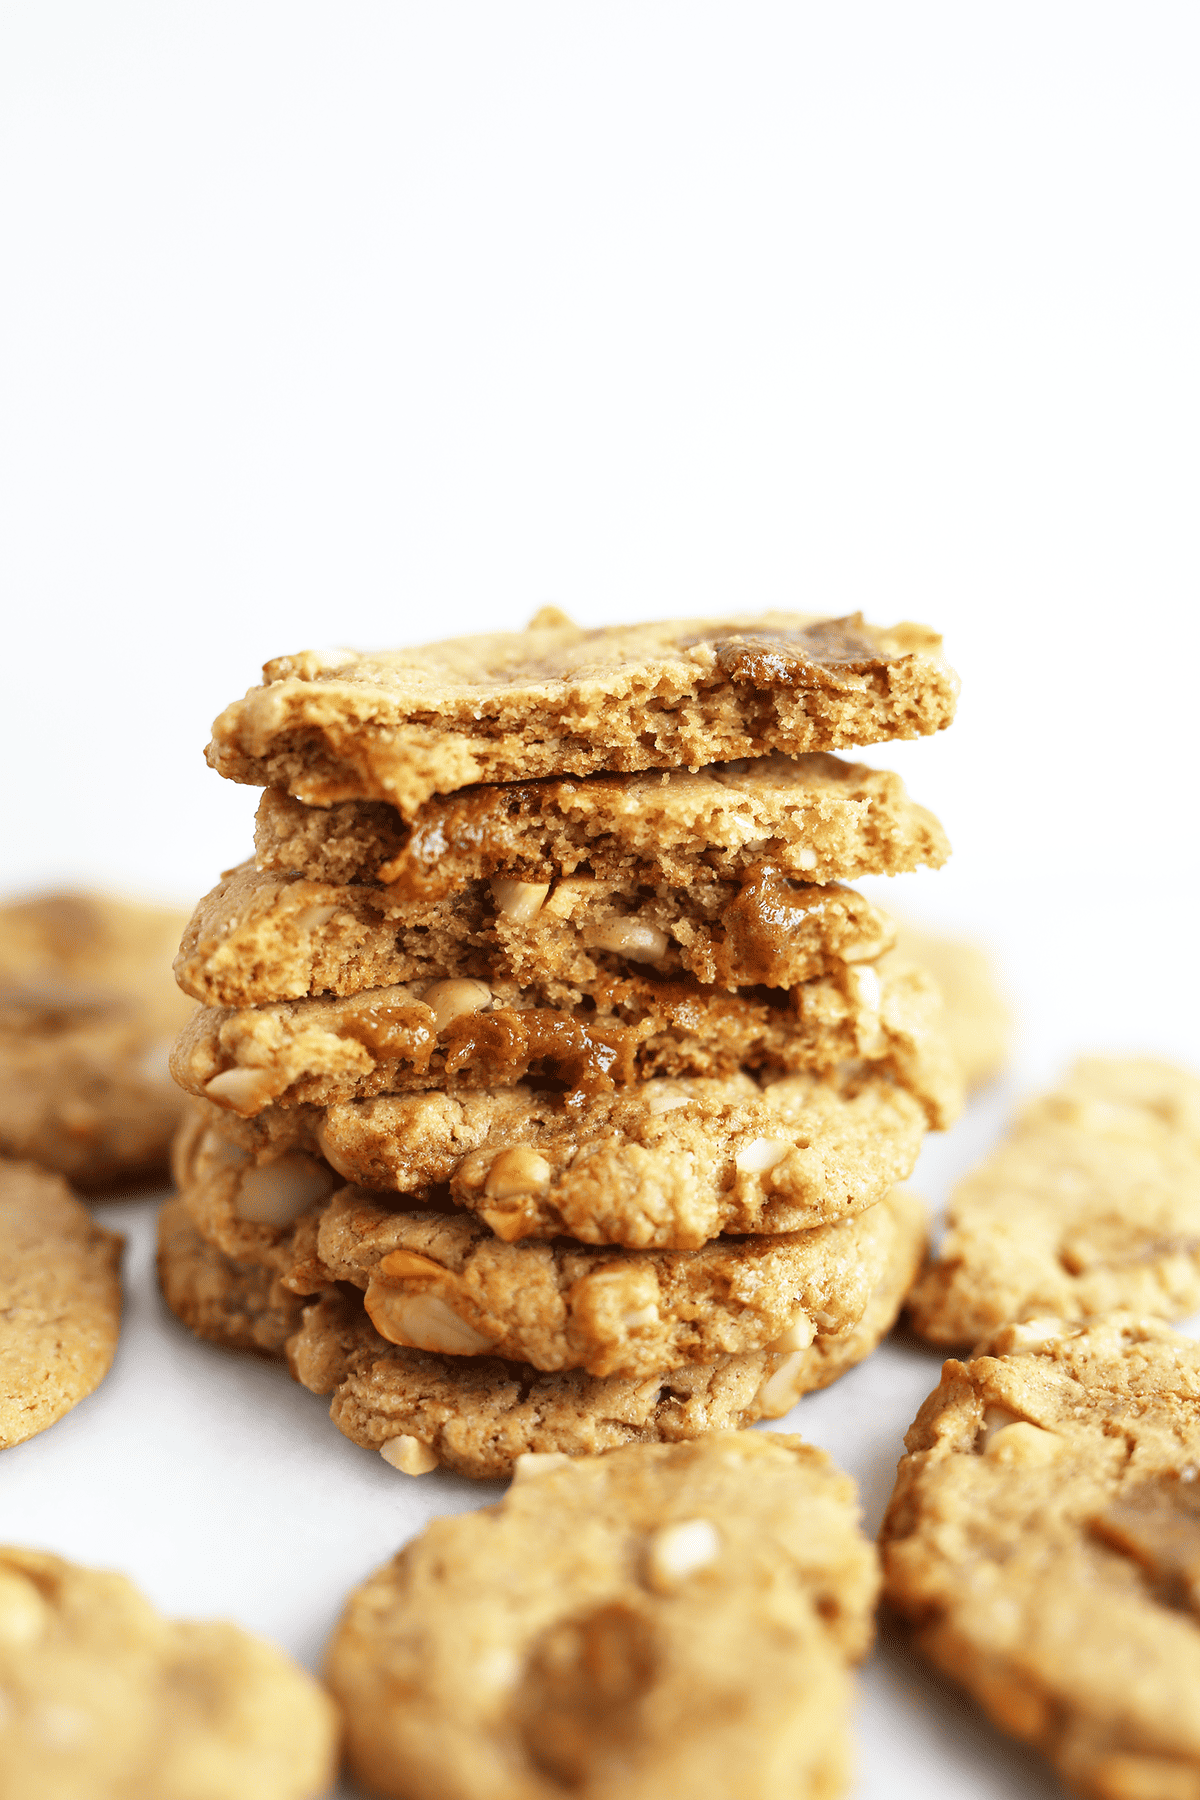 These Caramel Macadamia Cookies are bakery style chewy good-ness! An absolute favorite packed with caramel and macadamia nuts and vegan of course!